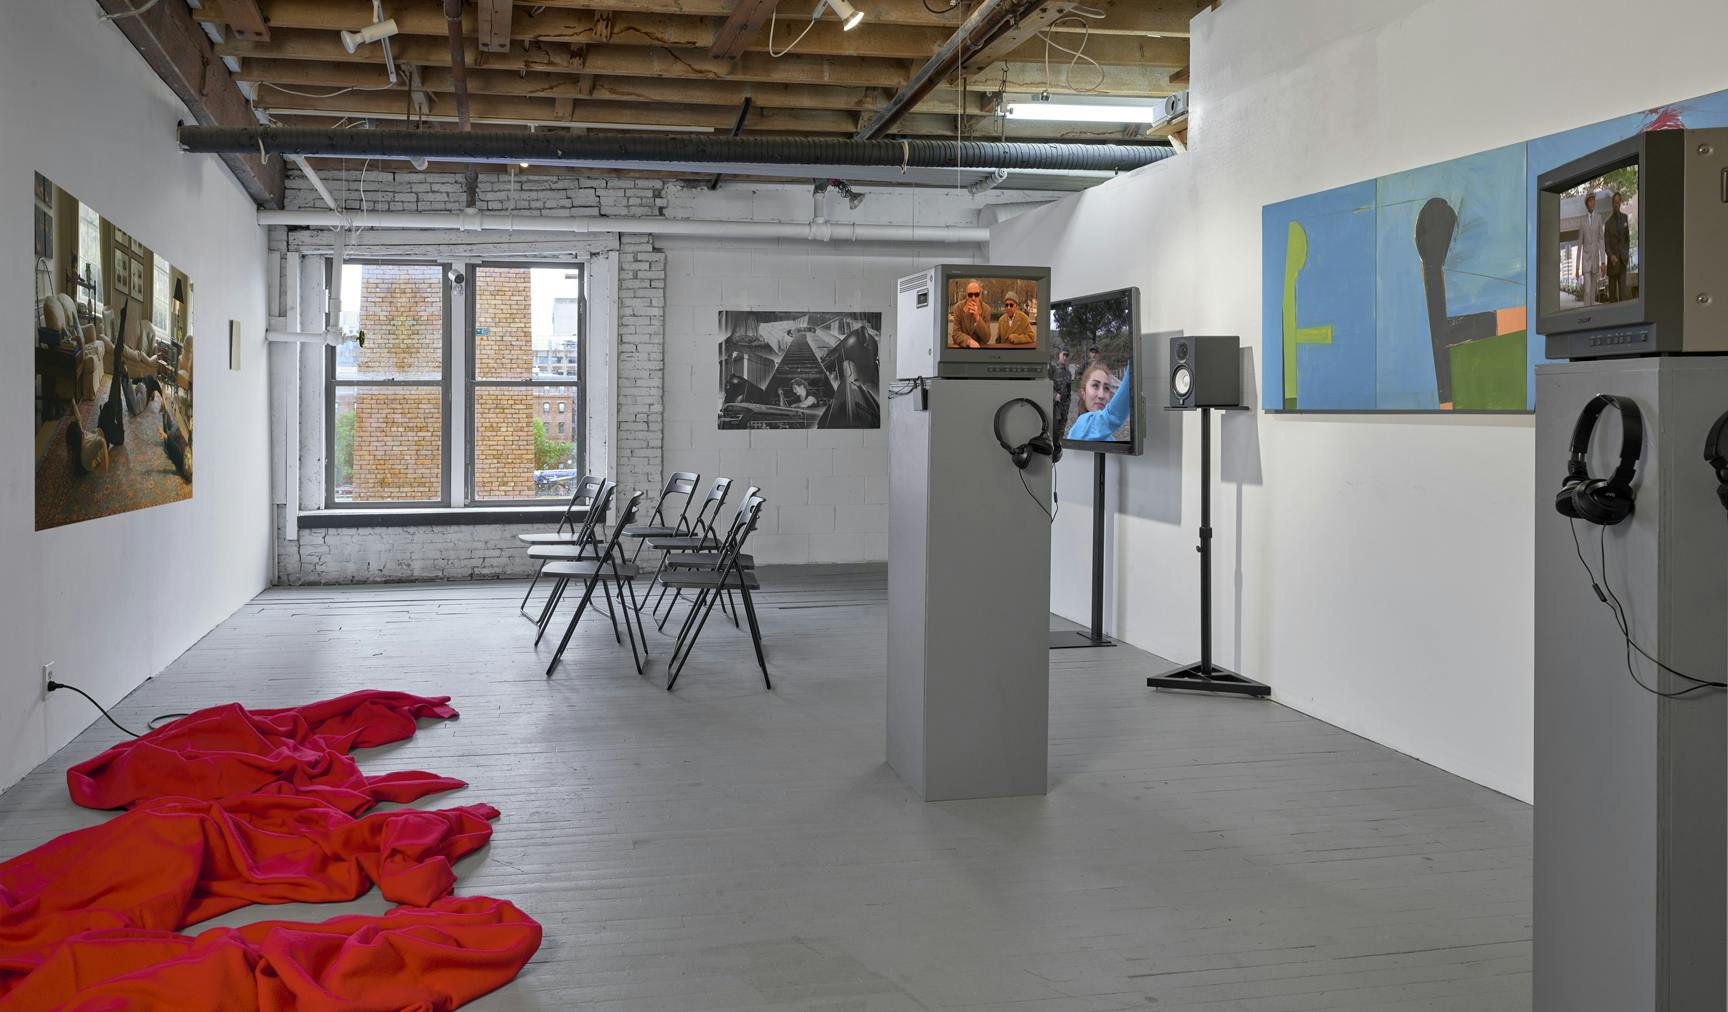 An installation features a red cloth on the floor of the space, television screens, and art hanging from the walls.